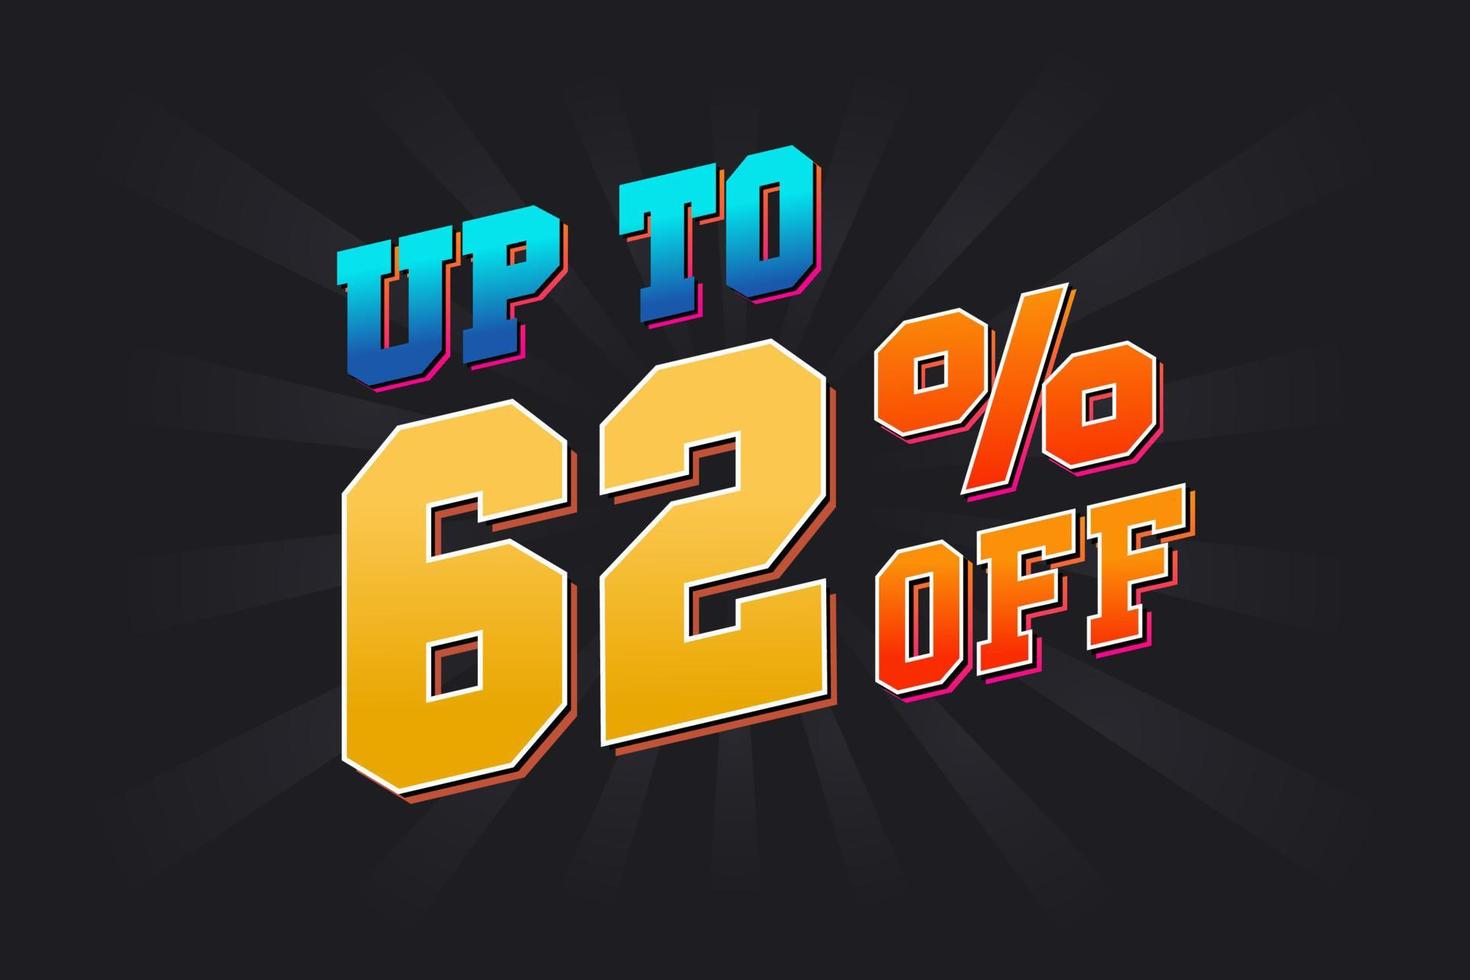 Up To 62 Percent off Special Discount Offer. Upto 62 off Sale of advertising campaign vector graphics.